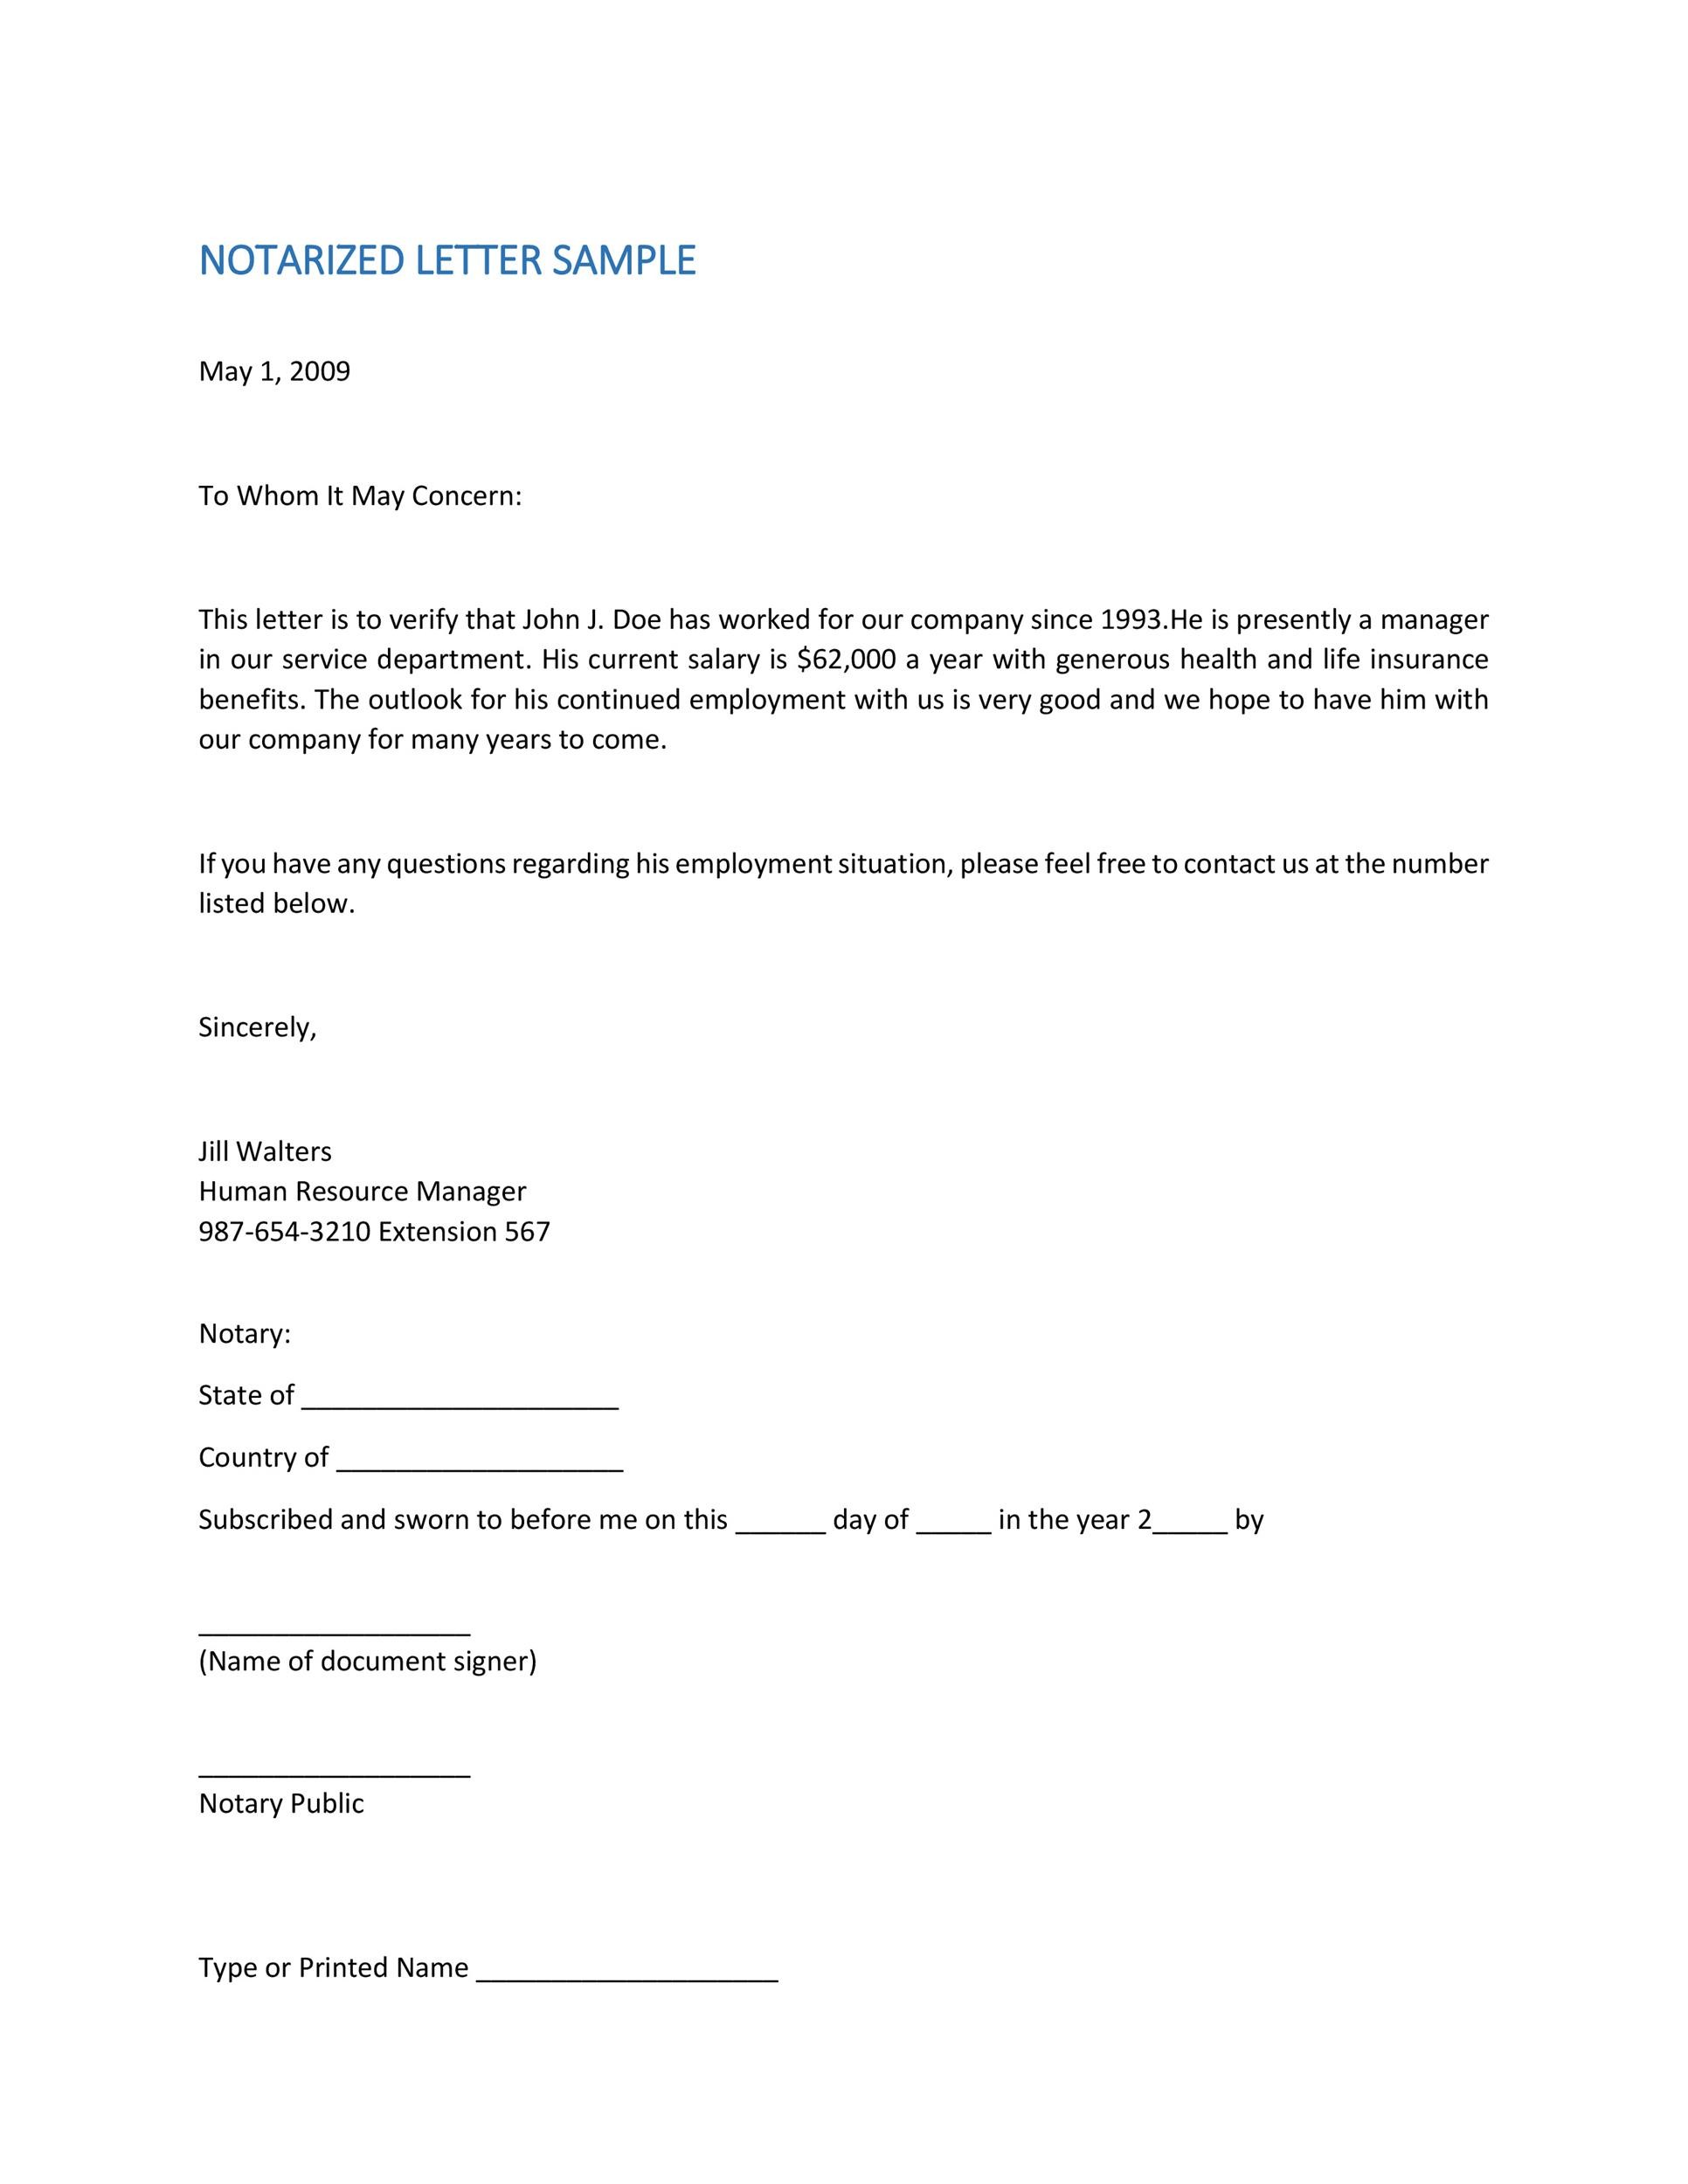 30-professional-notarized-letter-templates-templatelab